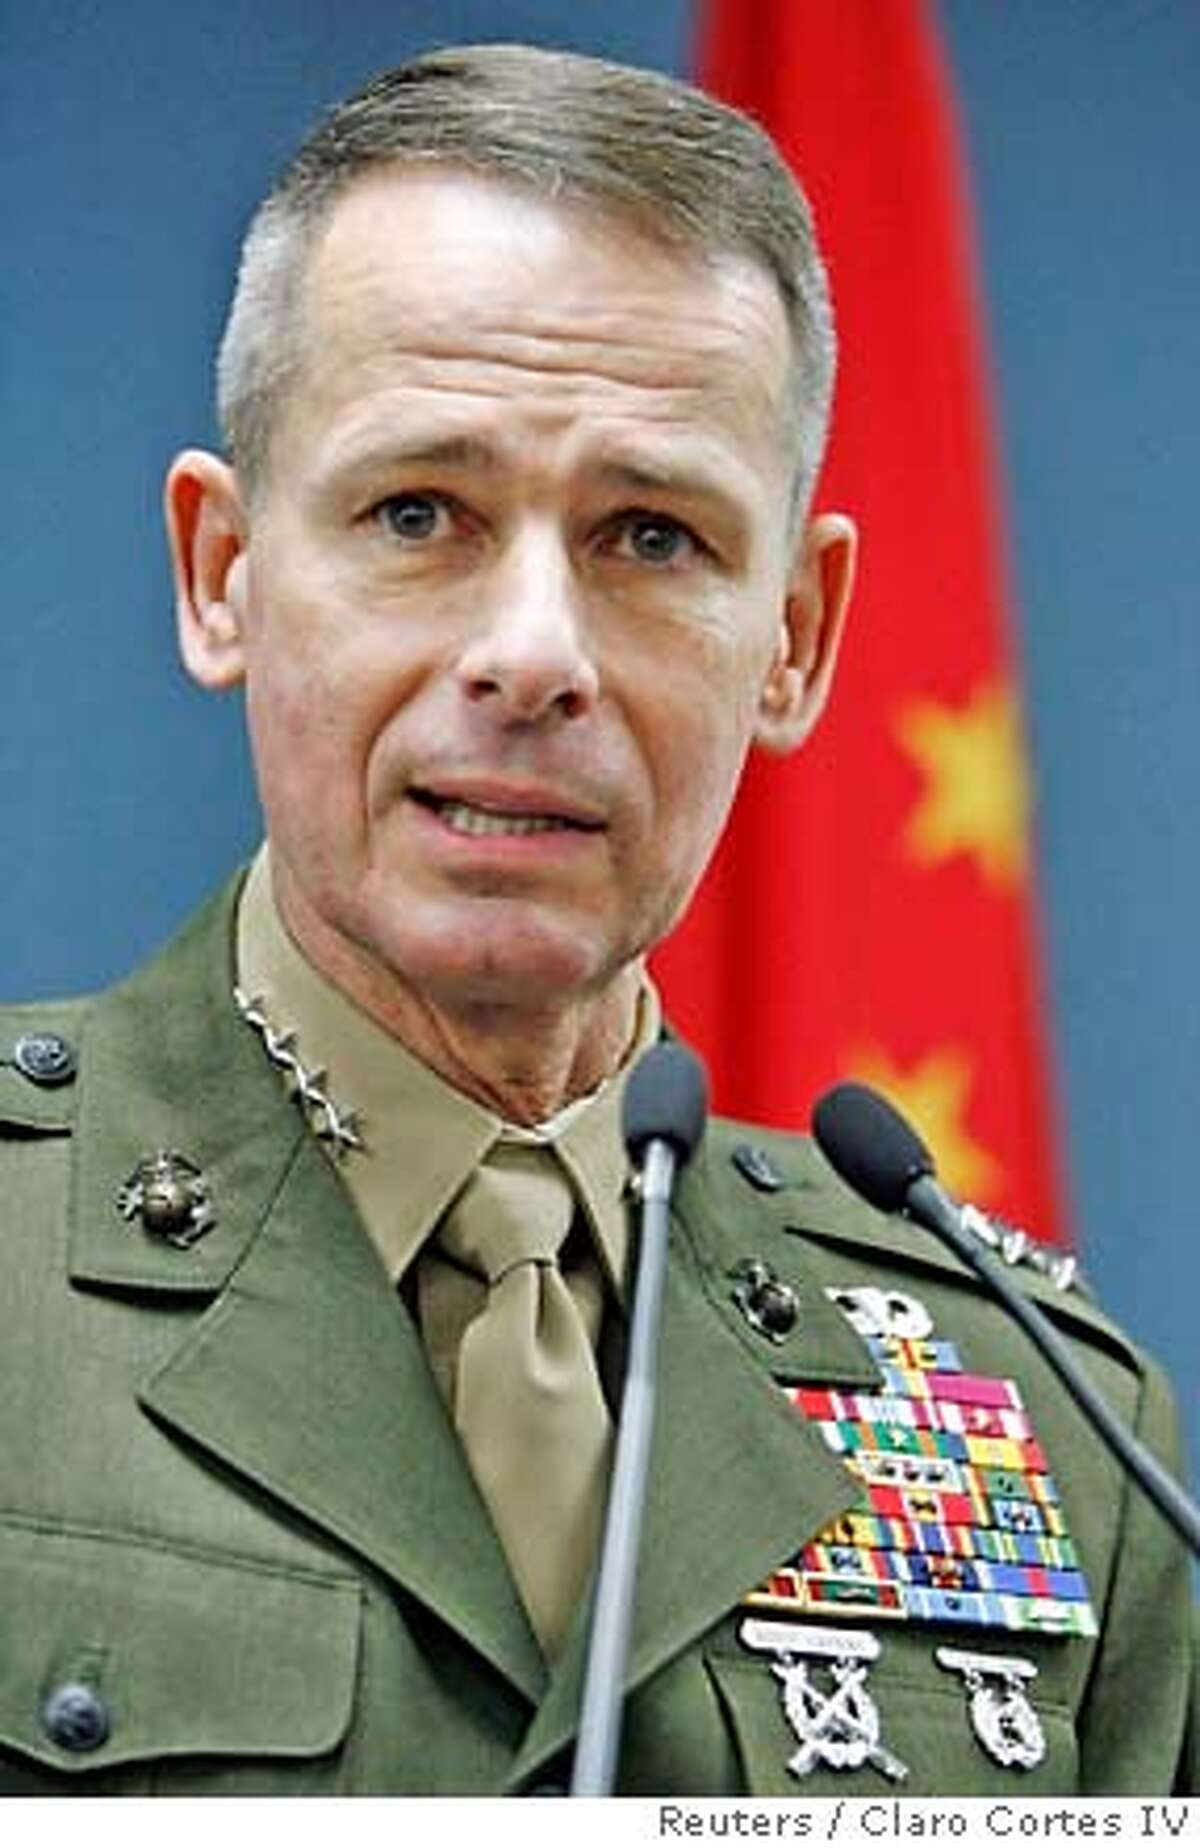 Chairman of the U.S. Joint Chiefs of Staff, Marine Gen. Peter Pace answers a question during a news conference in Beijing, in this March 23, 2007 file photo. Pace, the top U.S. military officer, will retire at the end of his term later this year and be replaced by Navy Adm. Mike Mullen, Defense Secretary Robert Gates said on June 8, 2007. REUTERS/Claro Cortes IV/Files (CHINA) 0